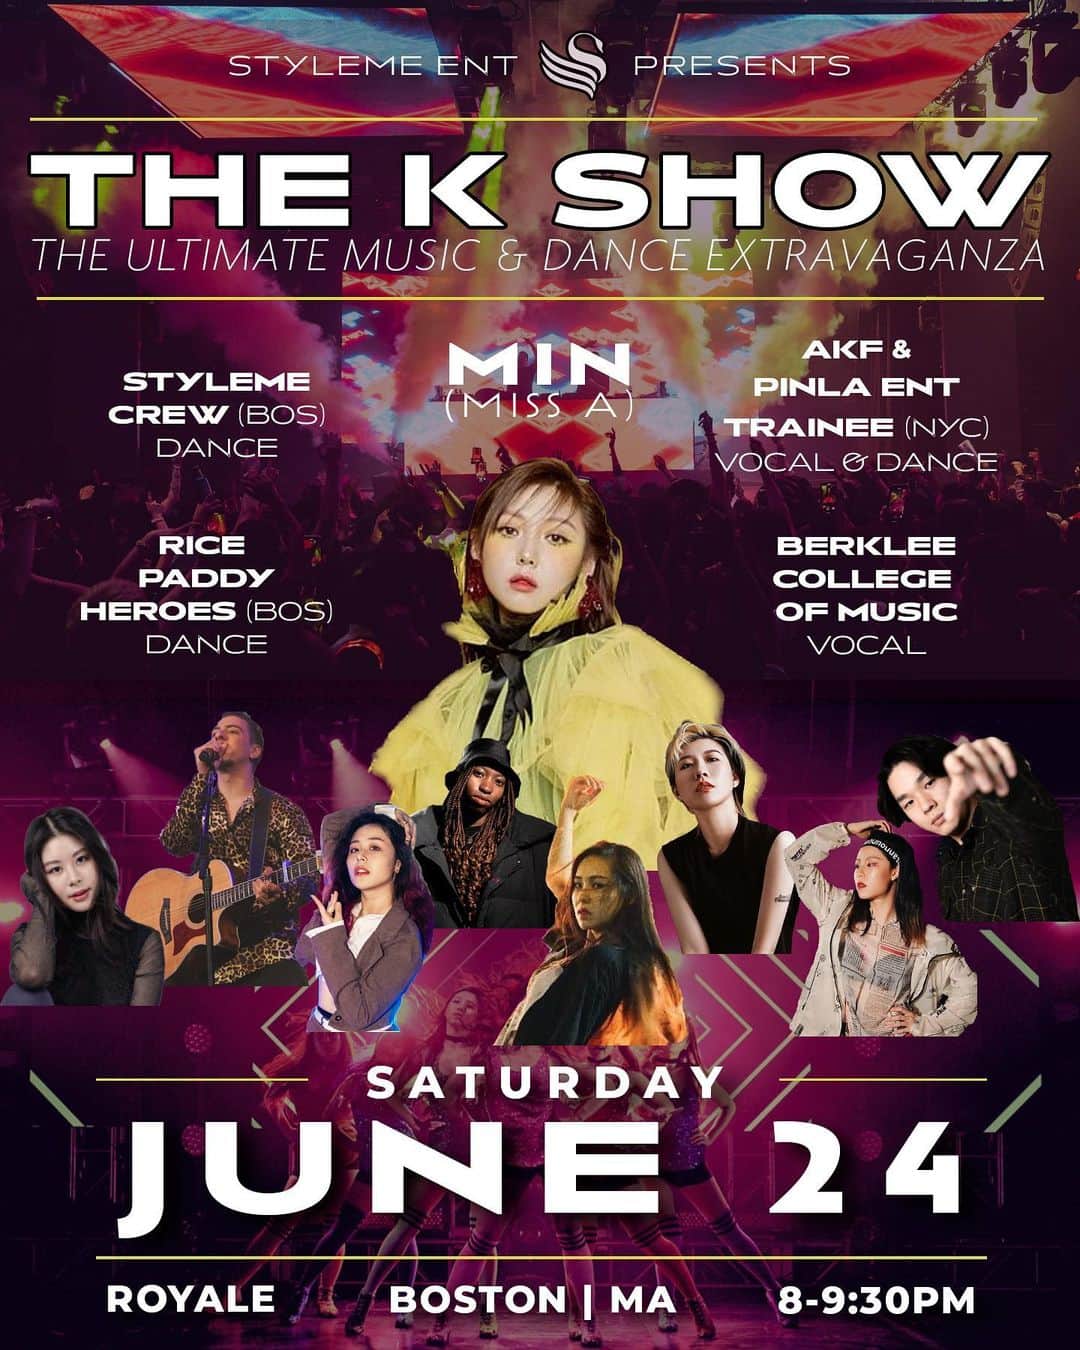 ミン さんのインスタグラム写真 - (ミン Instagram)「【StyleMe】The K Show -- the ultimate music & dance extravaganza ☝️Only at our showcase‼️ Powerhouse vocals & dance by the iconic Min @therealminnn from the most popular K-Pop girl group of the era, Miss A, live on stage‼️  【About the 🎡Showcase】 ⏰ Time: June 24th Saturday  8-9:30 pm 2023  📍 Location:  Royale Boston  279 Tremont St, Boston, MA 02116 💡10+ yrs old  Click 👉LINK IN BIO👈 @styleme_dance to get your tickets now‼️Prepare to be blown away‼️  Prior to the showcase, we will be hosting a special warm-up session 🎉“K-pop random play dance" from 6:30 - 7:30 pm.   ——————————————  💰【Ticket Choices】🎫 🔥🔥Super Early Bird: $ 26  超级早鸟票 🐦 LIMITED TO 5⃣️0⃣️ PEOPLE ONLY! Early Bird: $ 33  早鸟票  DDL: April.20th  【General Admission】 $ 40  普通票 - This is a Standing Room Only ticket 【At door】$ 60  现场票 【Skip The Line】 $16 免排队- The ticket allows you early access to the venue lobby and early access to StyleMe merchandise! Skip The Line doors open at 6:00 pm. *This does not include a The K Show concert ticket!*  【VIP】 $ 75  贵宾票 💐 LIMITED‼️ - Your The K Show concert ticket - Skip The Line - 1:1 photo with Min with professional setting and autograph *ONLY at The K Show!* - Luxury table sitting at the balcony area (2nd floor) with a perfect view of the extravaganza below, with meticulously prepared fruits & desserts & drinks   - Reserved front line (standing room) closet to the performance stage   - The K Show backstage access  ——————————————  【About the ✨ Artist- Min】 The Main dancer Lead vocalist/Lead rapper of Miss A.  Sunbae of TWICE, Stray Kids, ITZY,and NMIXX. Miss A was a Korean-Chinese four-member girl group formed by JYP Entertainment in 2010. The group debuted in July 2010 with the single "Bad Girl Good Girl." Their debut song stayed as the number 1 song for four straight weeks, breaking the previous record set by Girls' Generation. . . #bostonnightlife  #bostonroyale #stylemedance #missamin #royaleboston #royalebostondancers #royalebostonevents #royalebostonclub #bostonmusic #bostonmusicscene #bostonconcert #bostonshow #bostonwhattodo #bostondance #bostondancescene #bostondancers #bostondancer #bostondancecommunity #bostonmusician #bostonmusicevents」3月26日 11時34分 - therealminnn